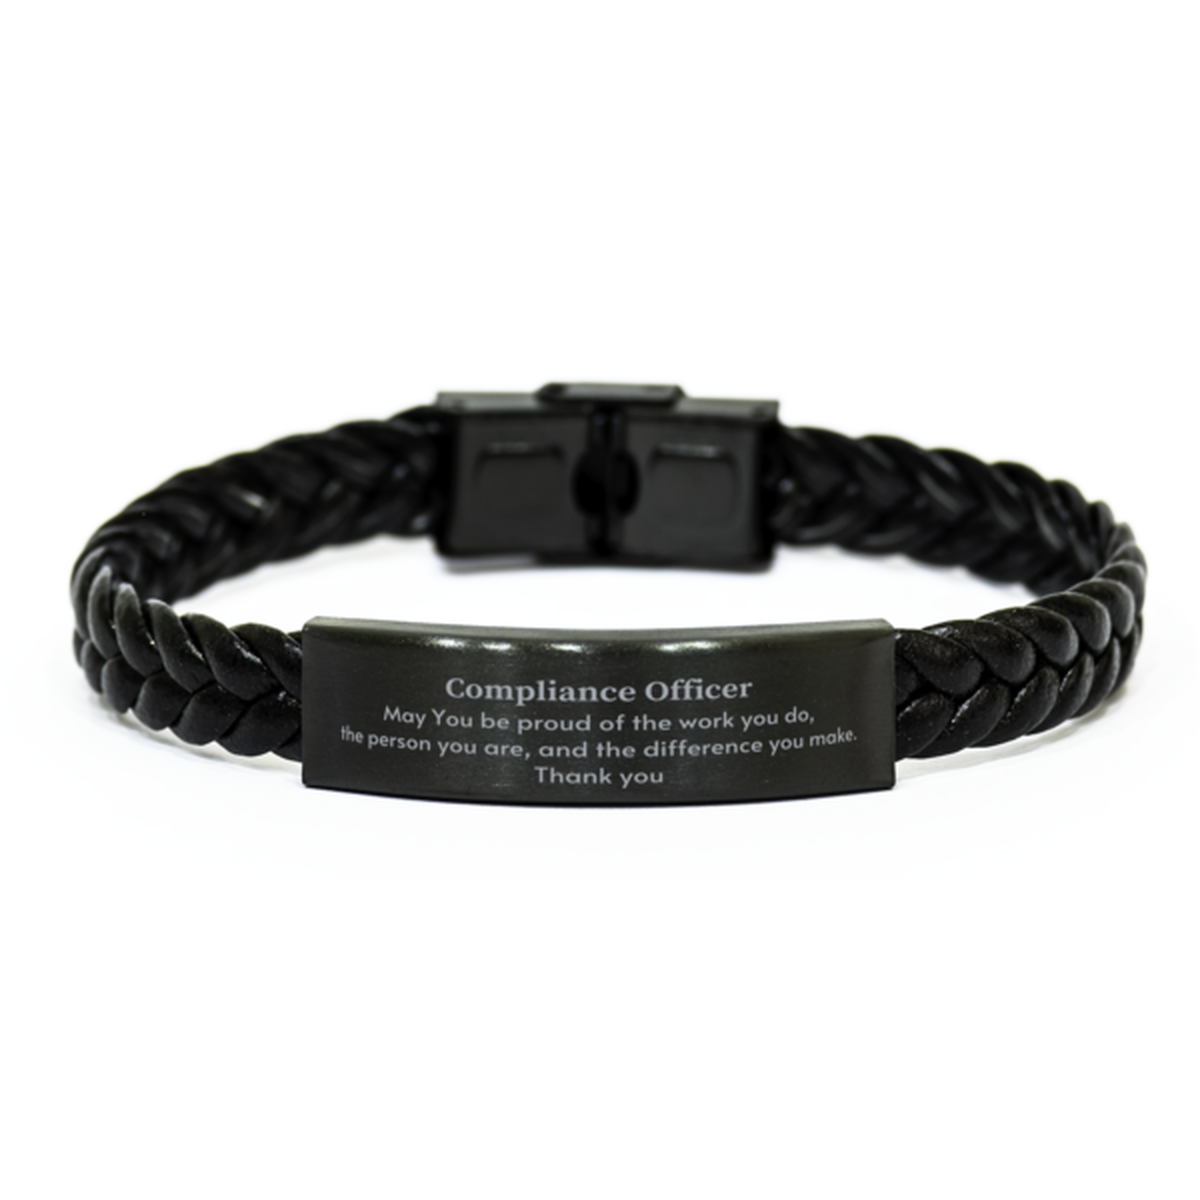 Heartwarming Braided Leather Bracelet Retirement Coworkers Gifts for Compliance Officer, Compliance Officer May You be proud of the work you do, the person you are Gifts for Boss Men Women Friends